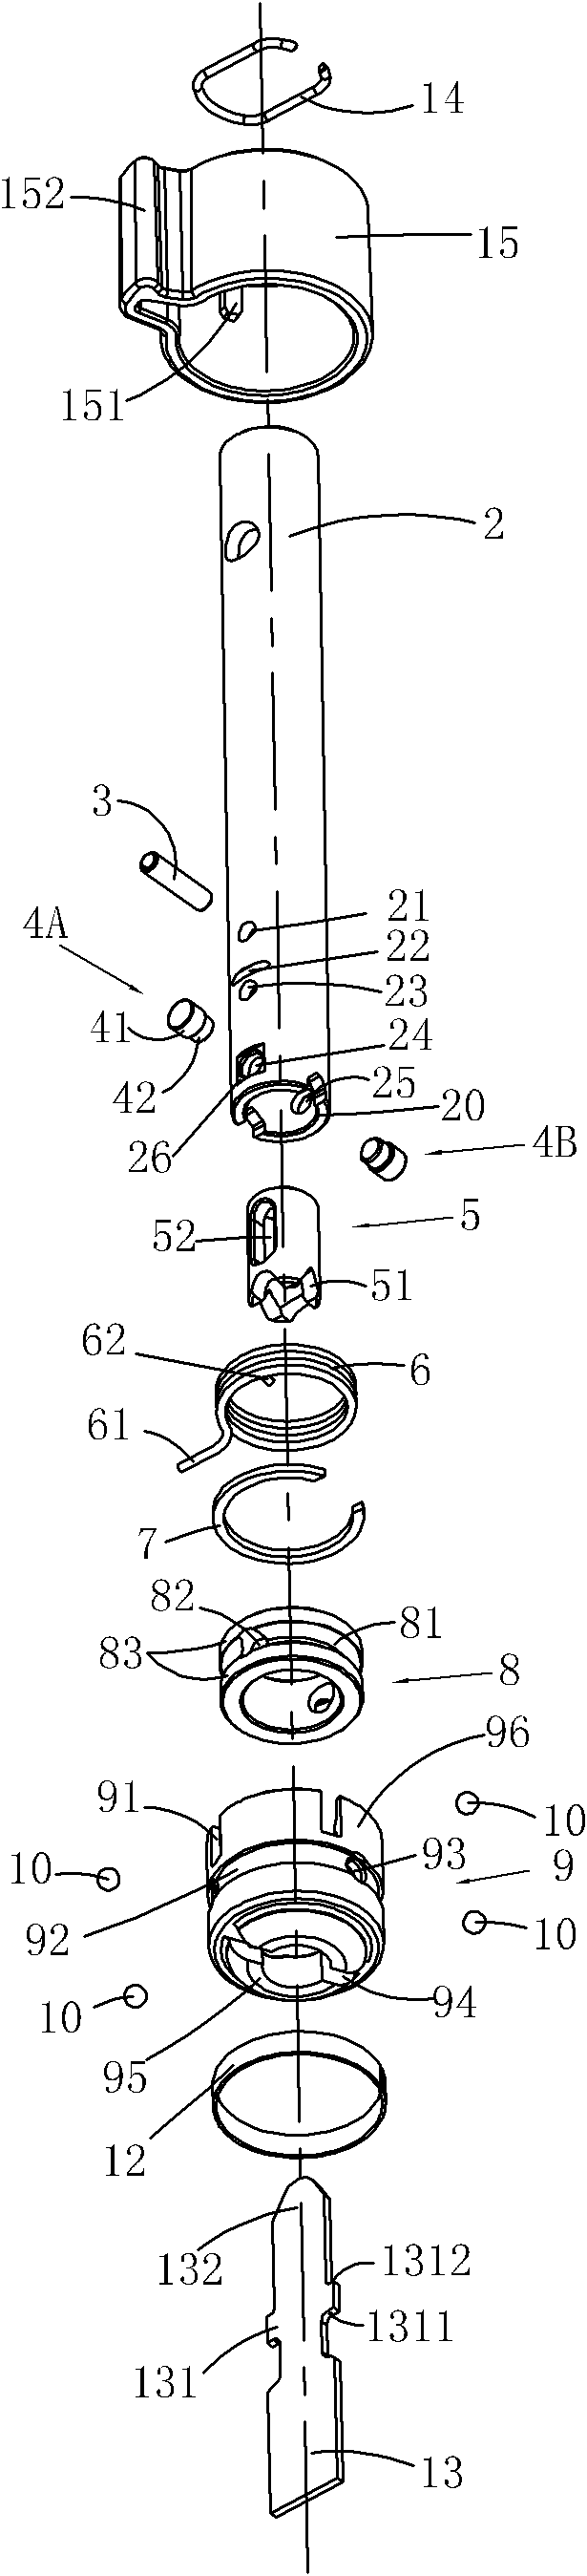 Saw blade clamping device